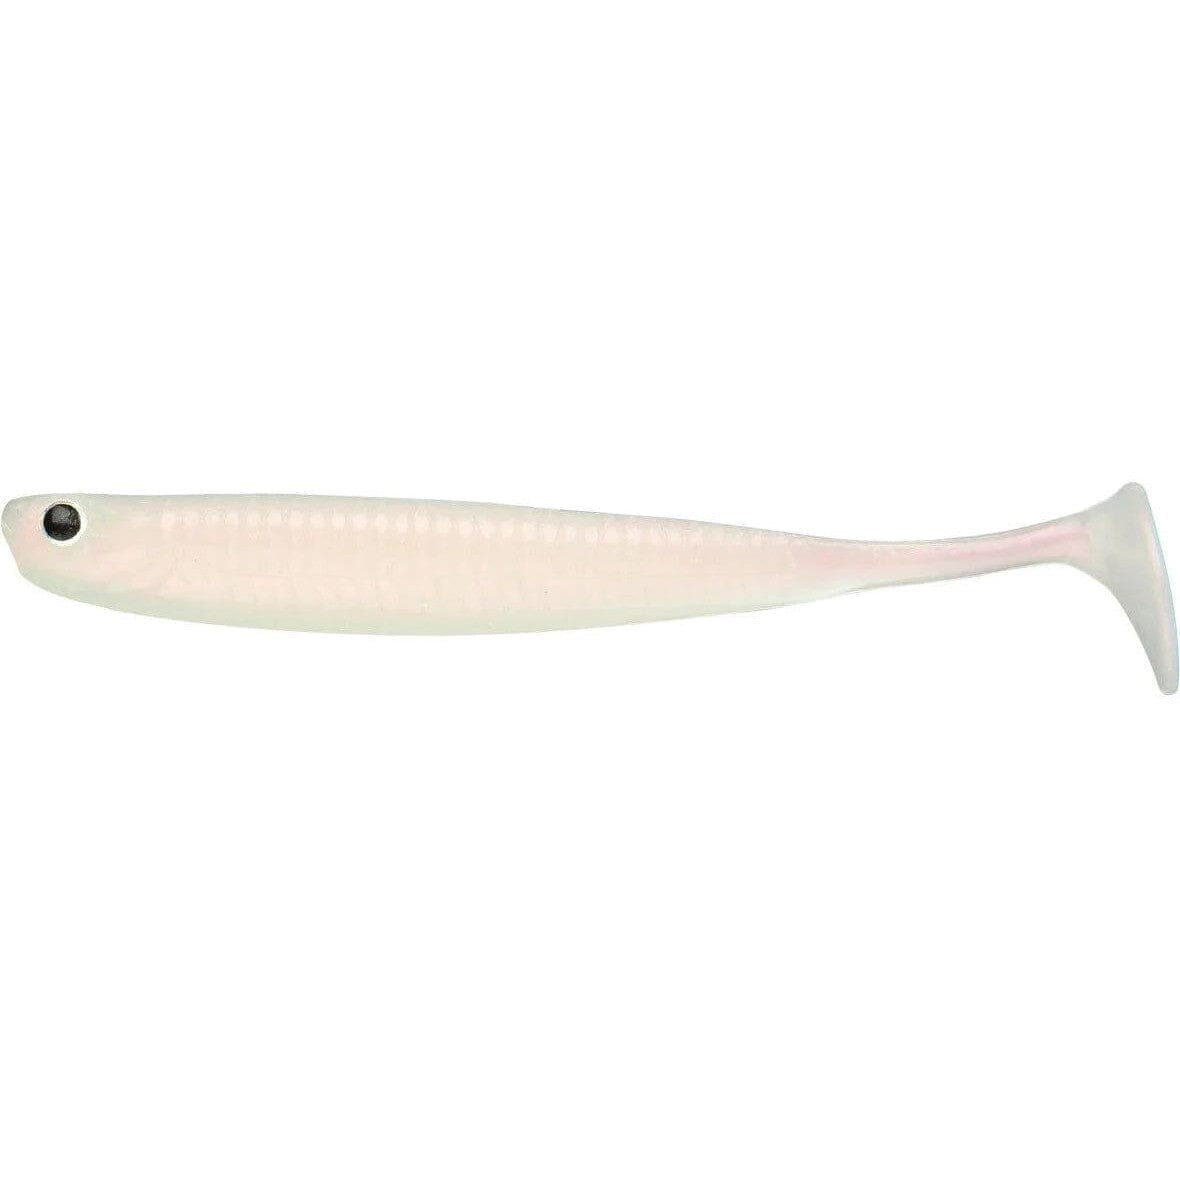 Damiki Anchovy Shad - Pearl White